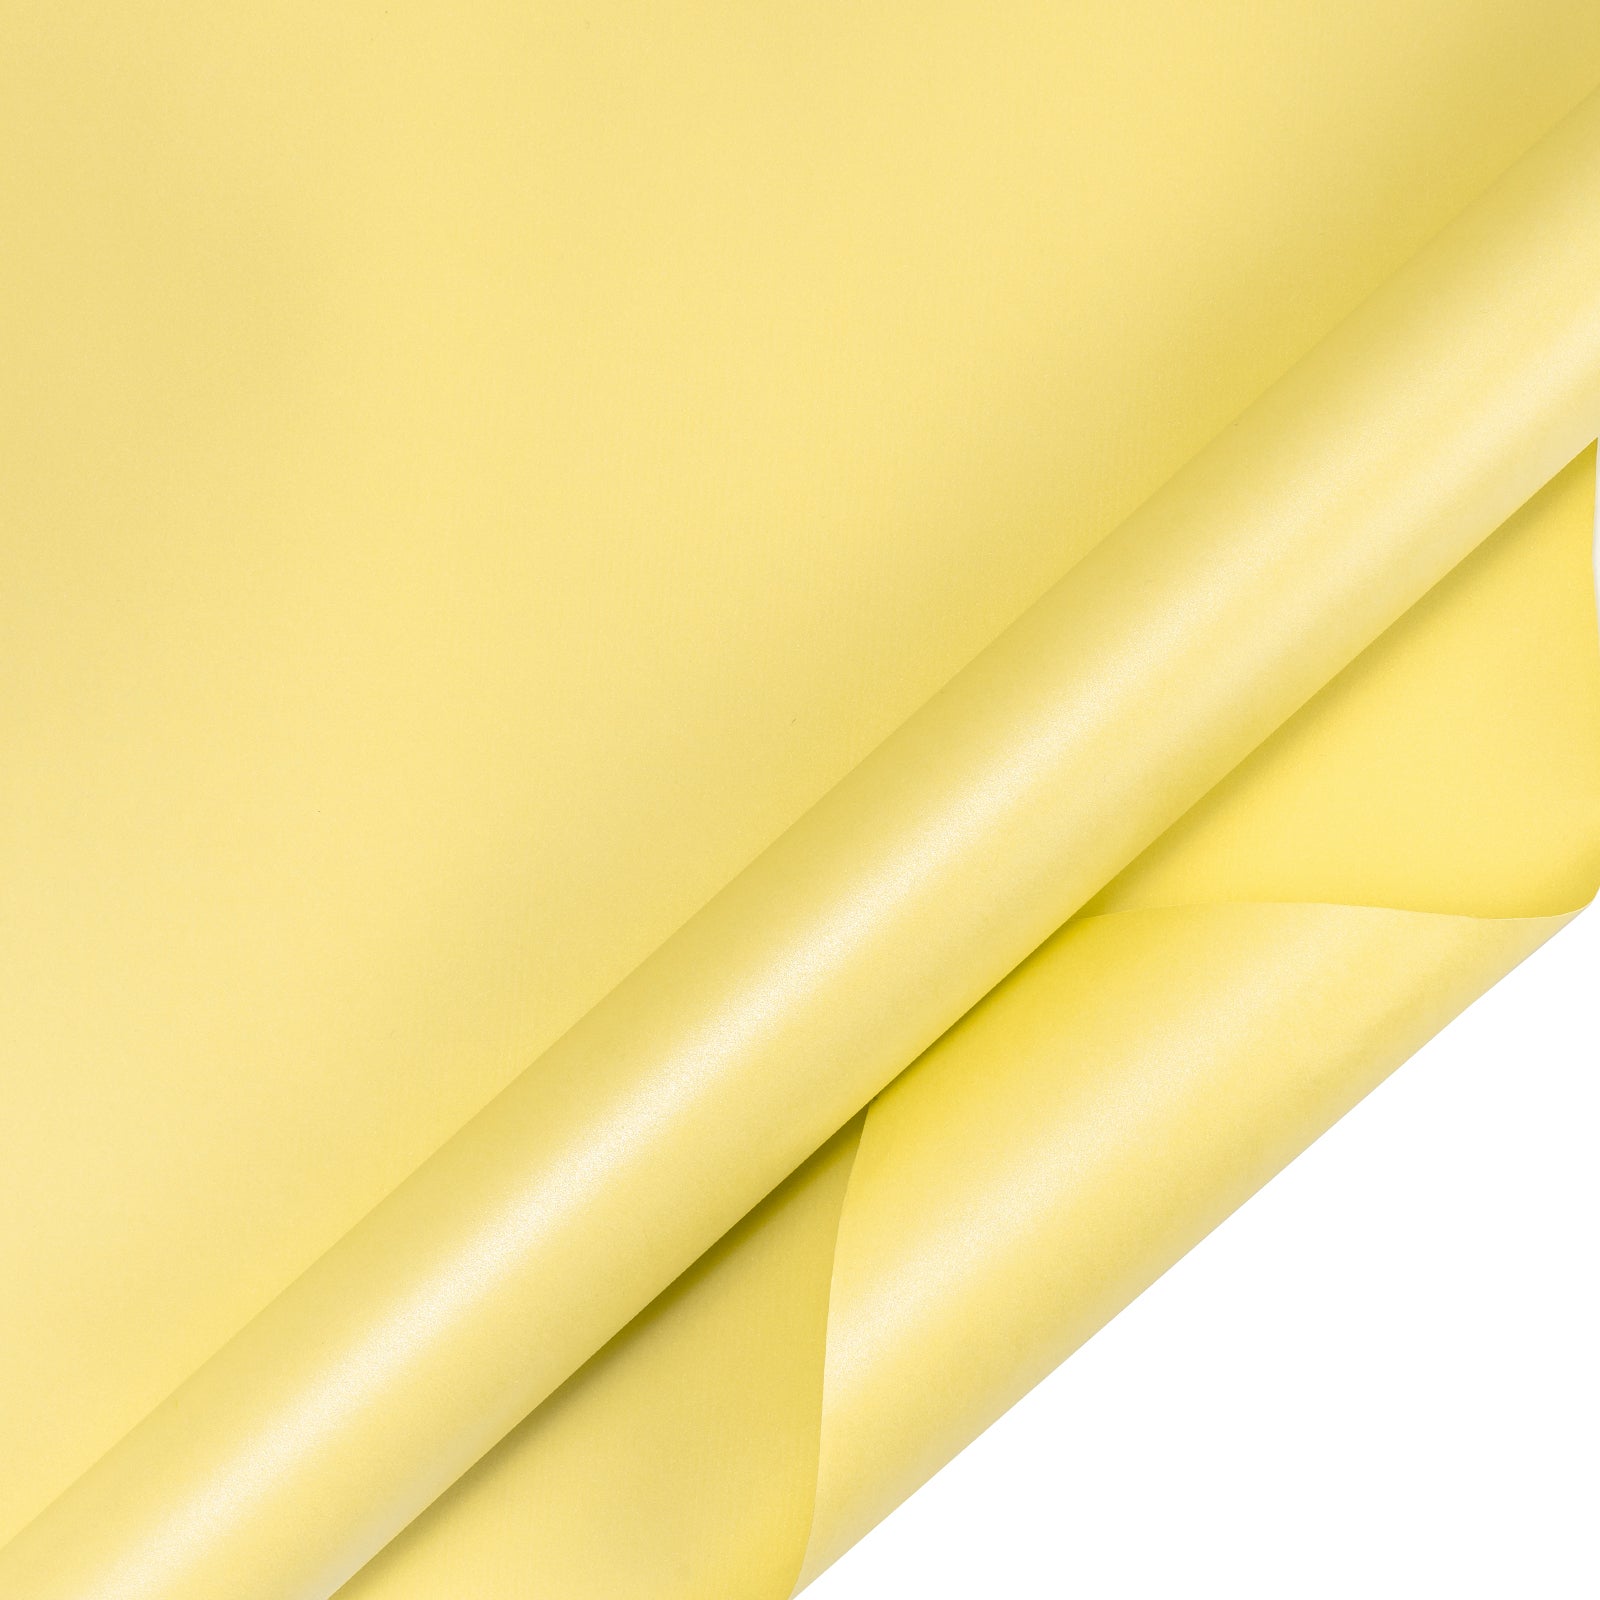 Pearl Gloss Wrapping Paper Roll Maize Yellow Ream Wholesale Wrapaholic